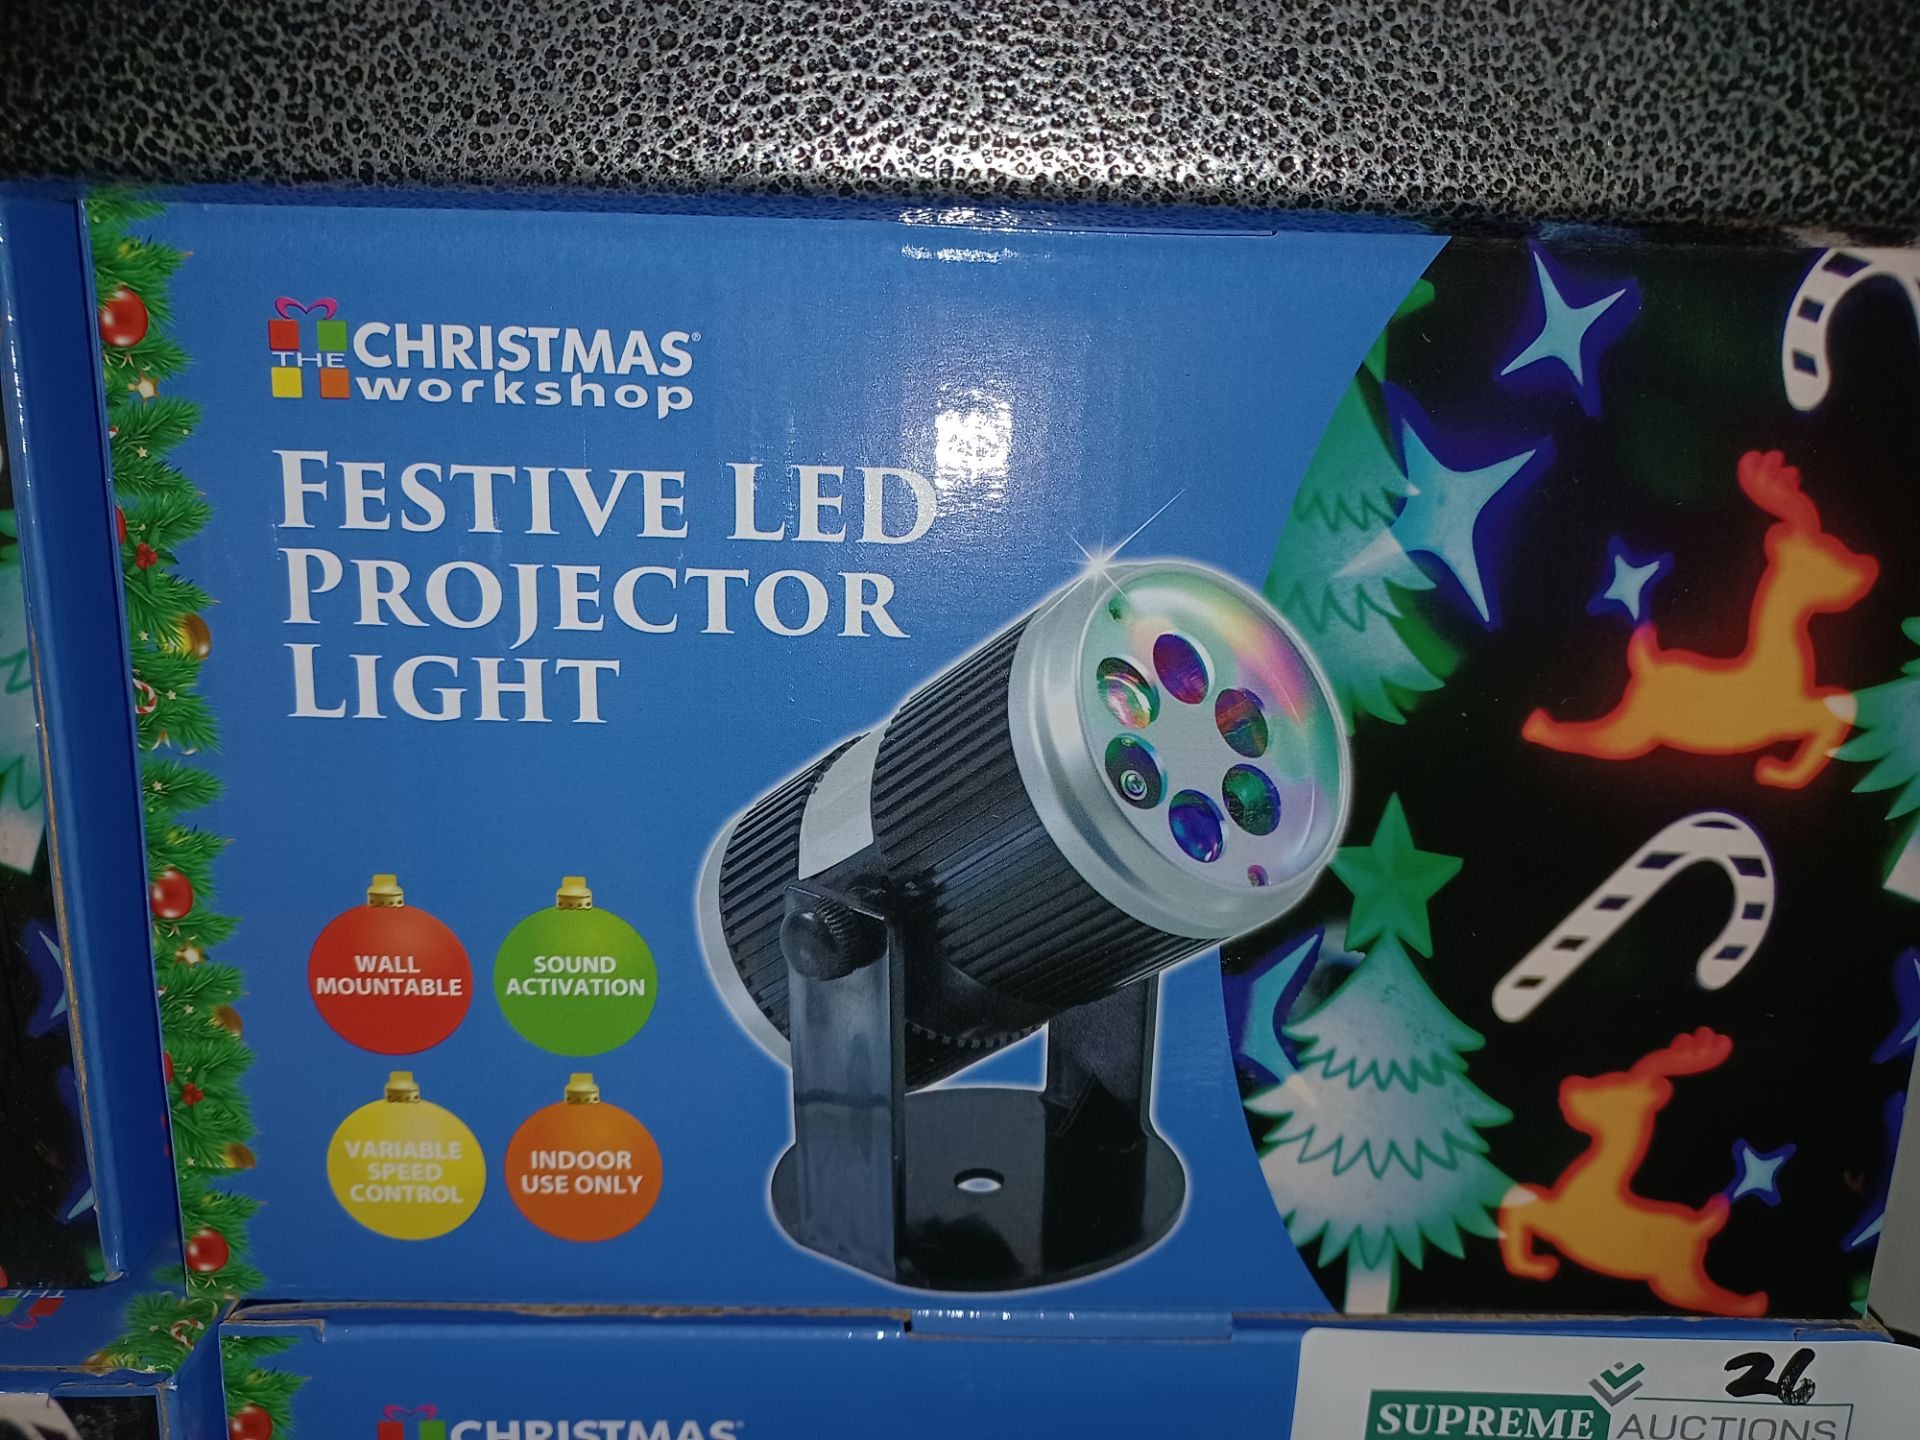 3 X NEW BOXED FESTIVE LED PROJECTOR LIGHT WALL MOUNTABLE, SOUND ACTIVATION, VARIABLE SPEED CONTROL -